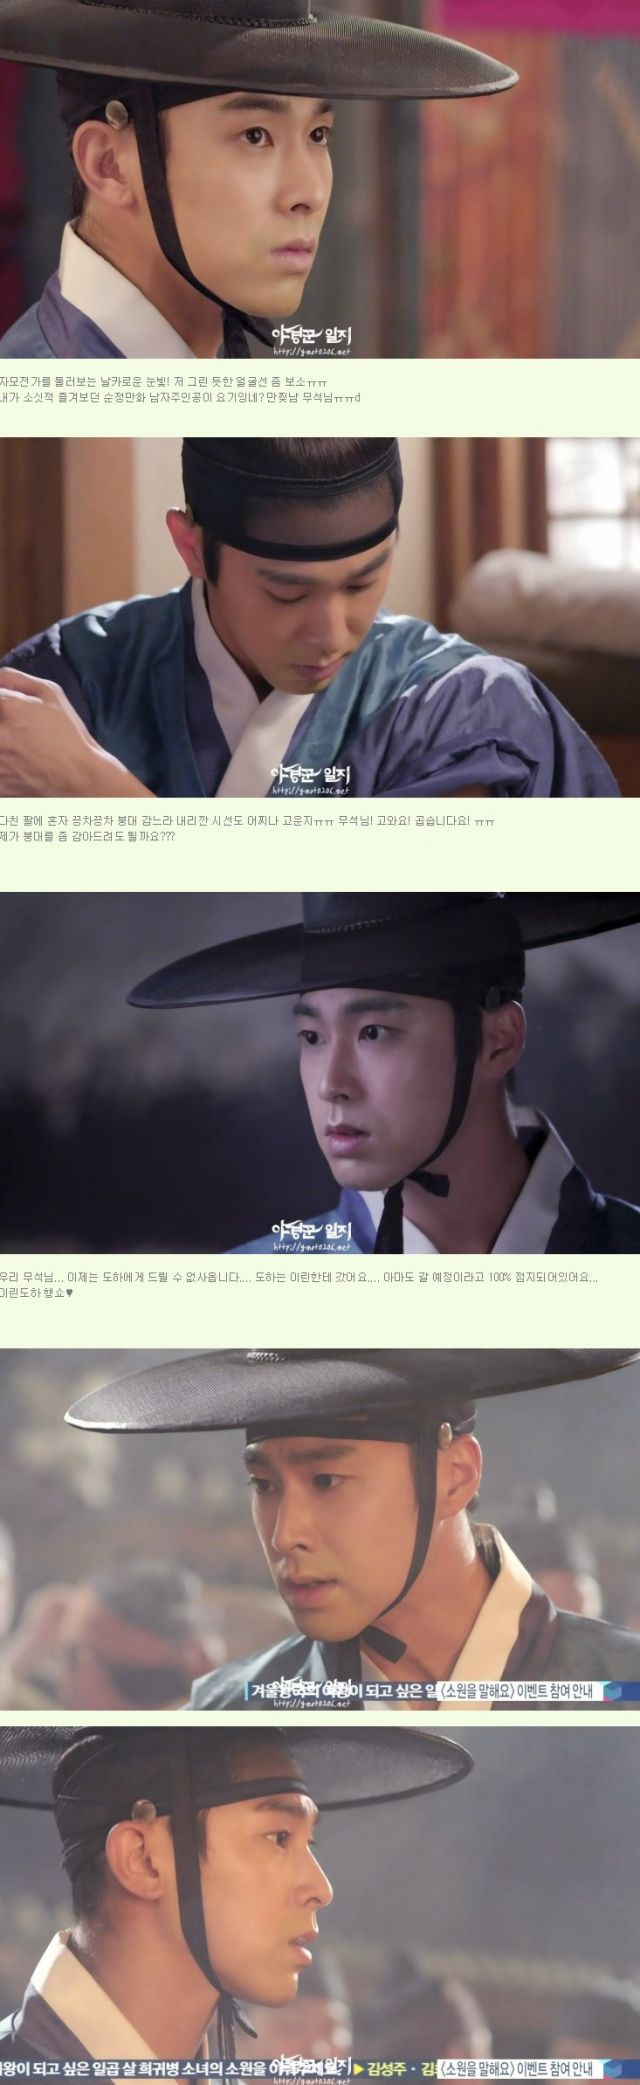 episode 8 captures for the Korean drama 'The Night Watchman's Journal'